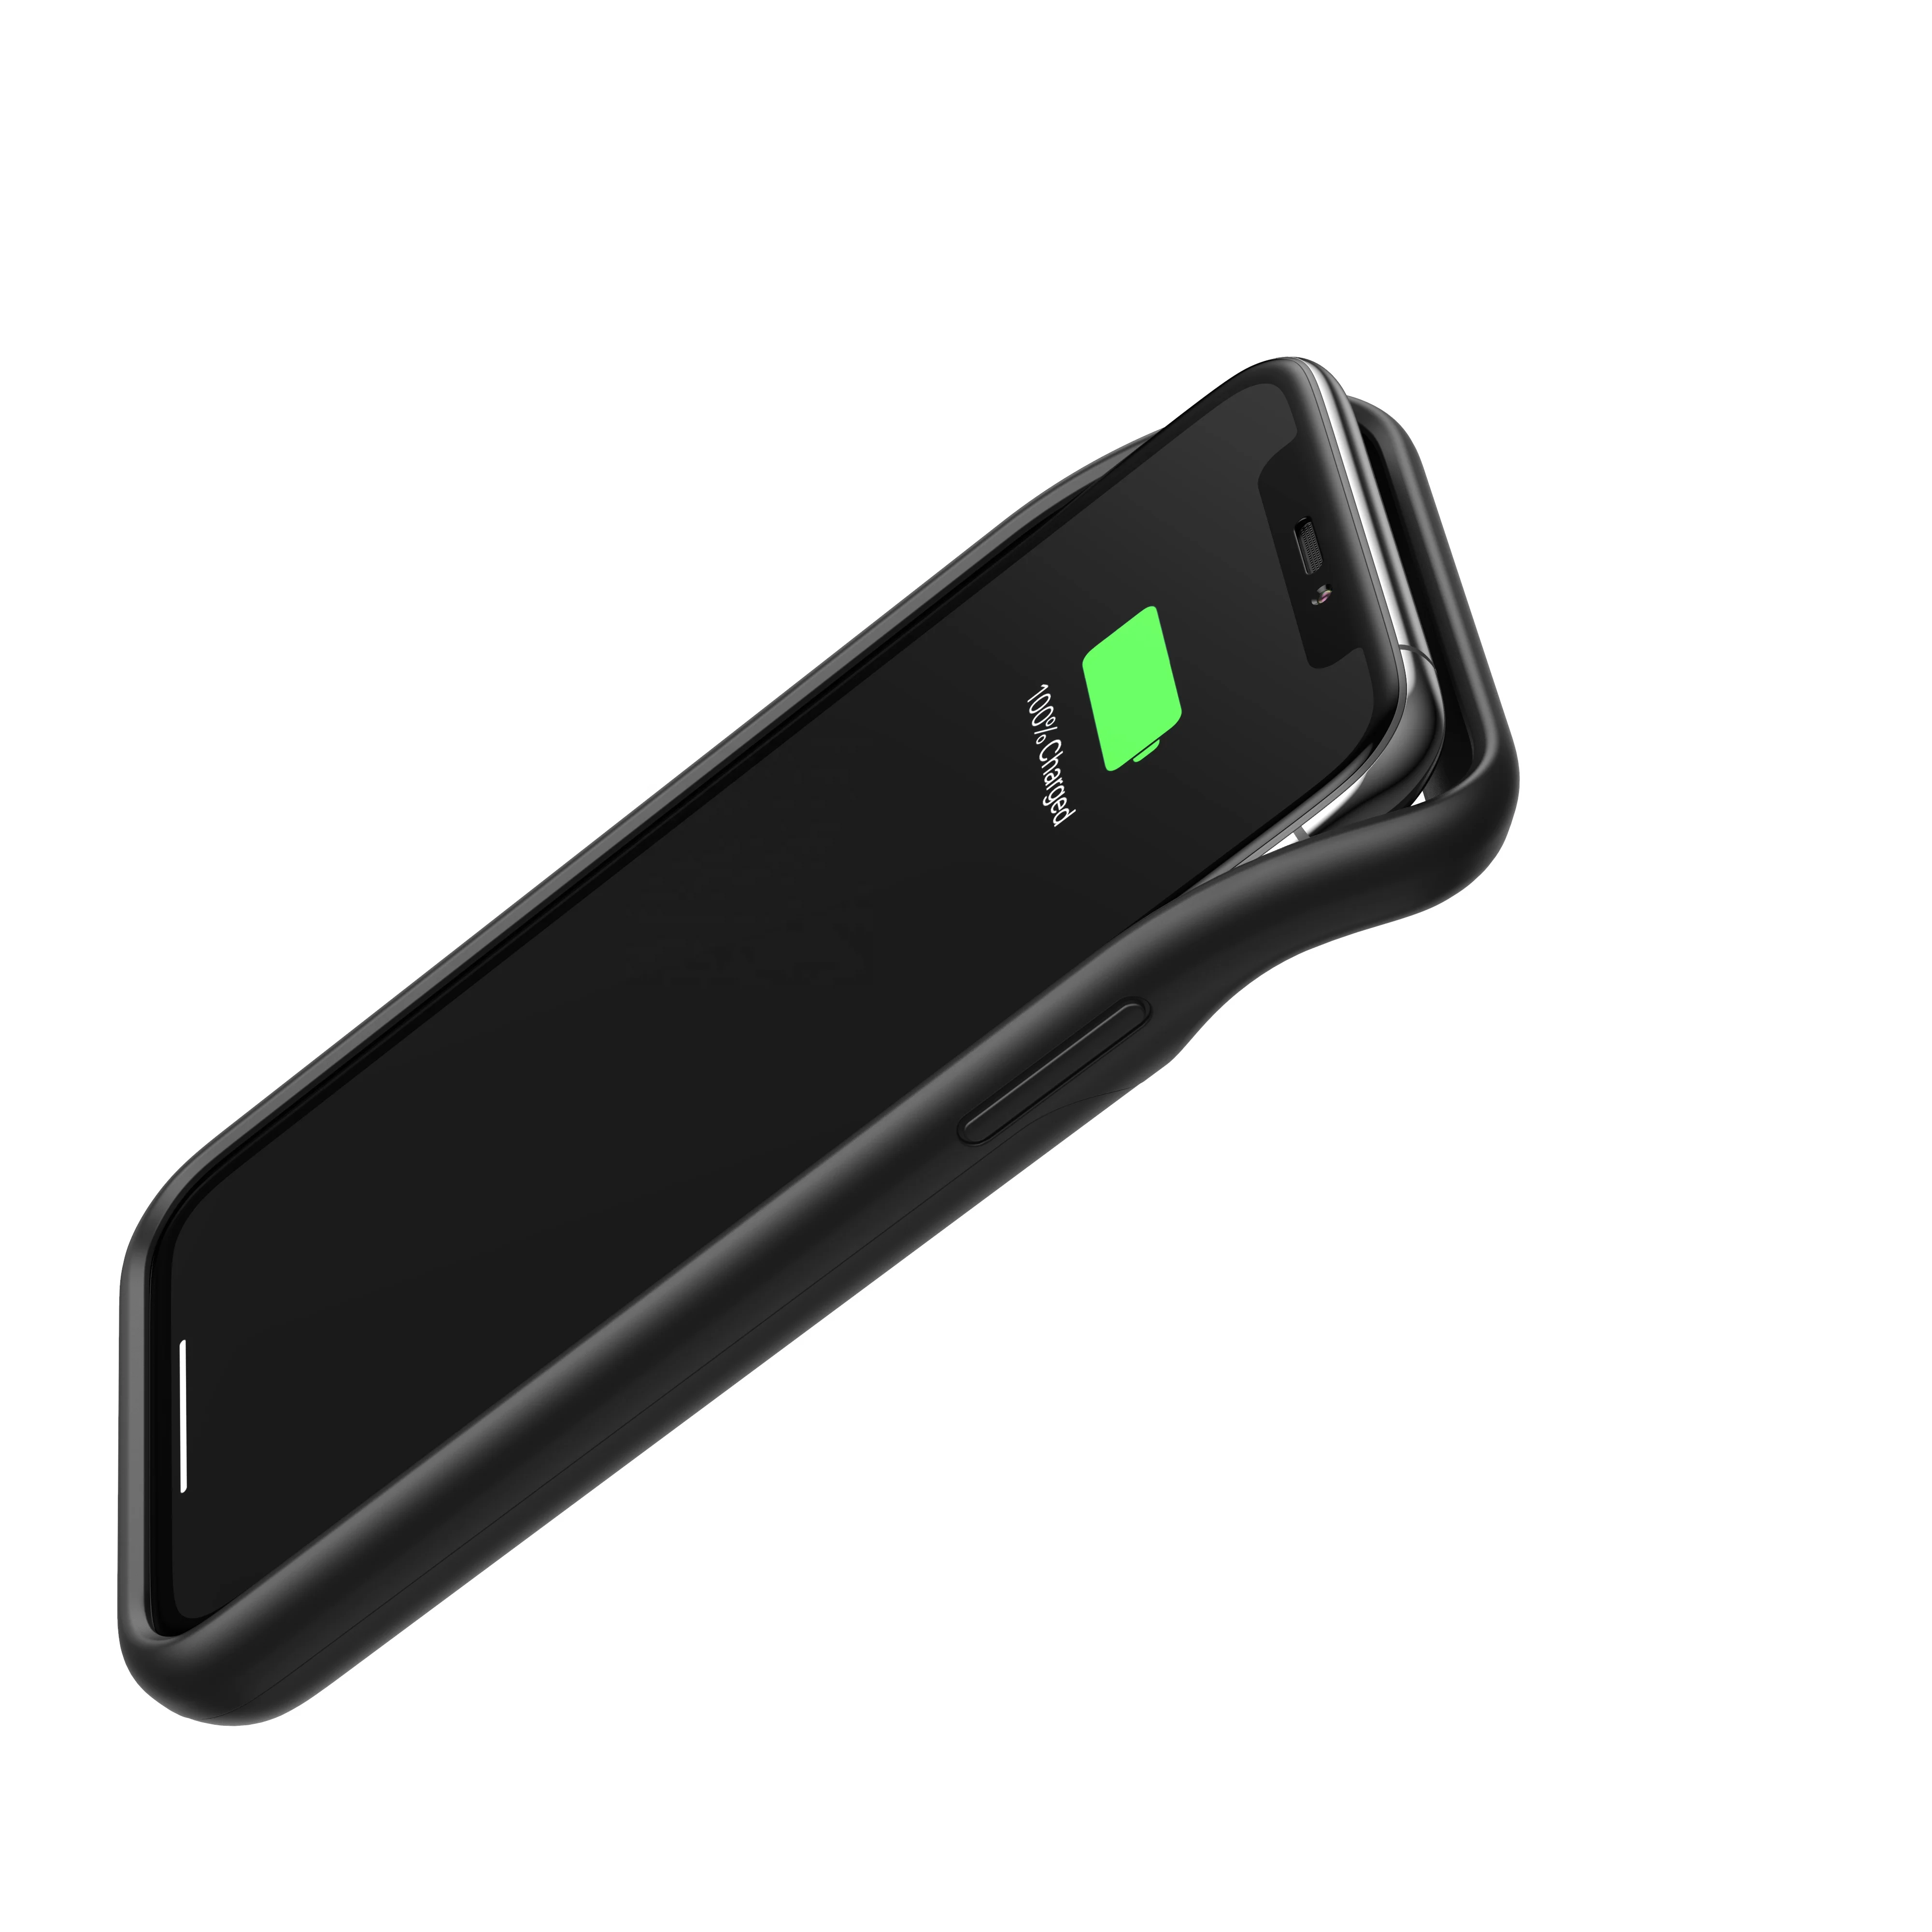 
2020 New Design Hot sale 3500 mAh wireless charging phone Battery Case for iphone X/XR /11/ 11pro 